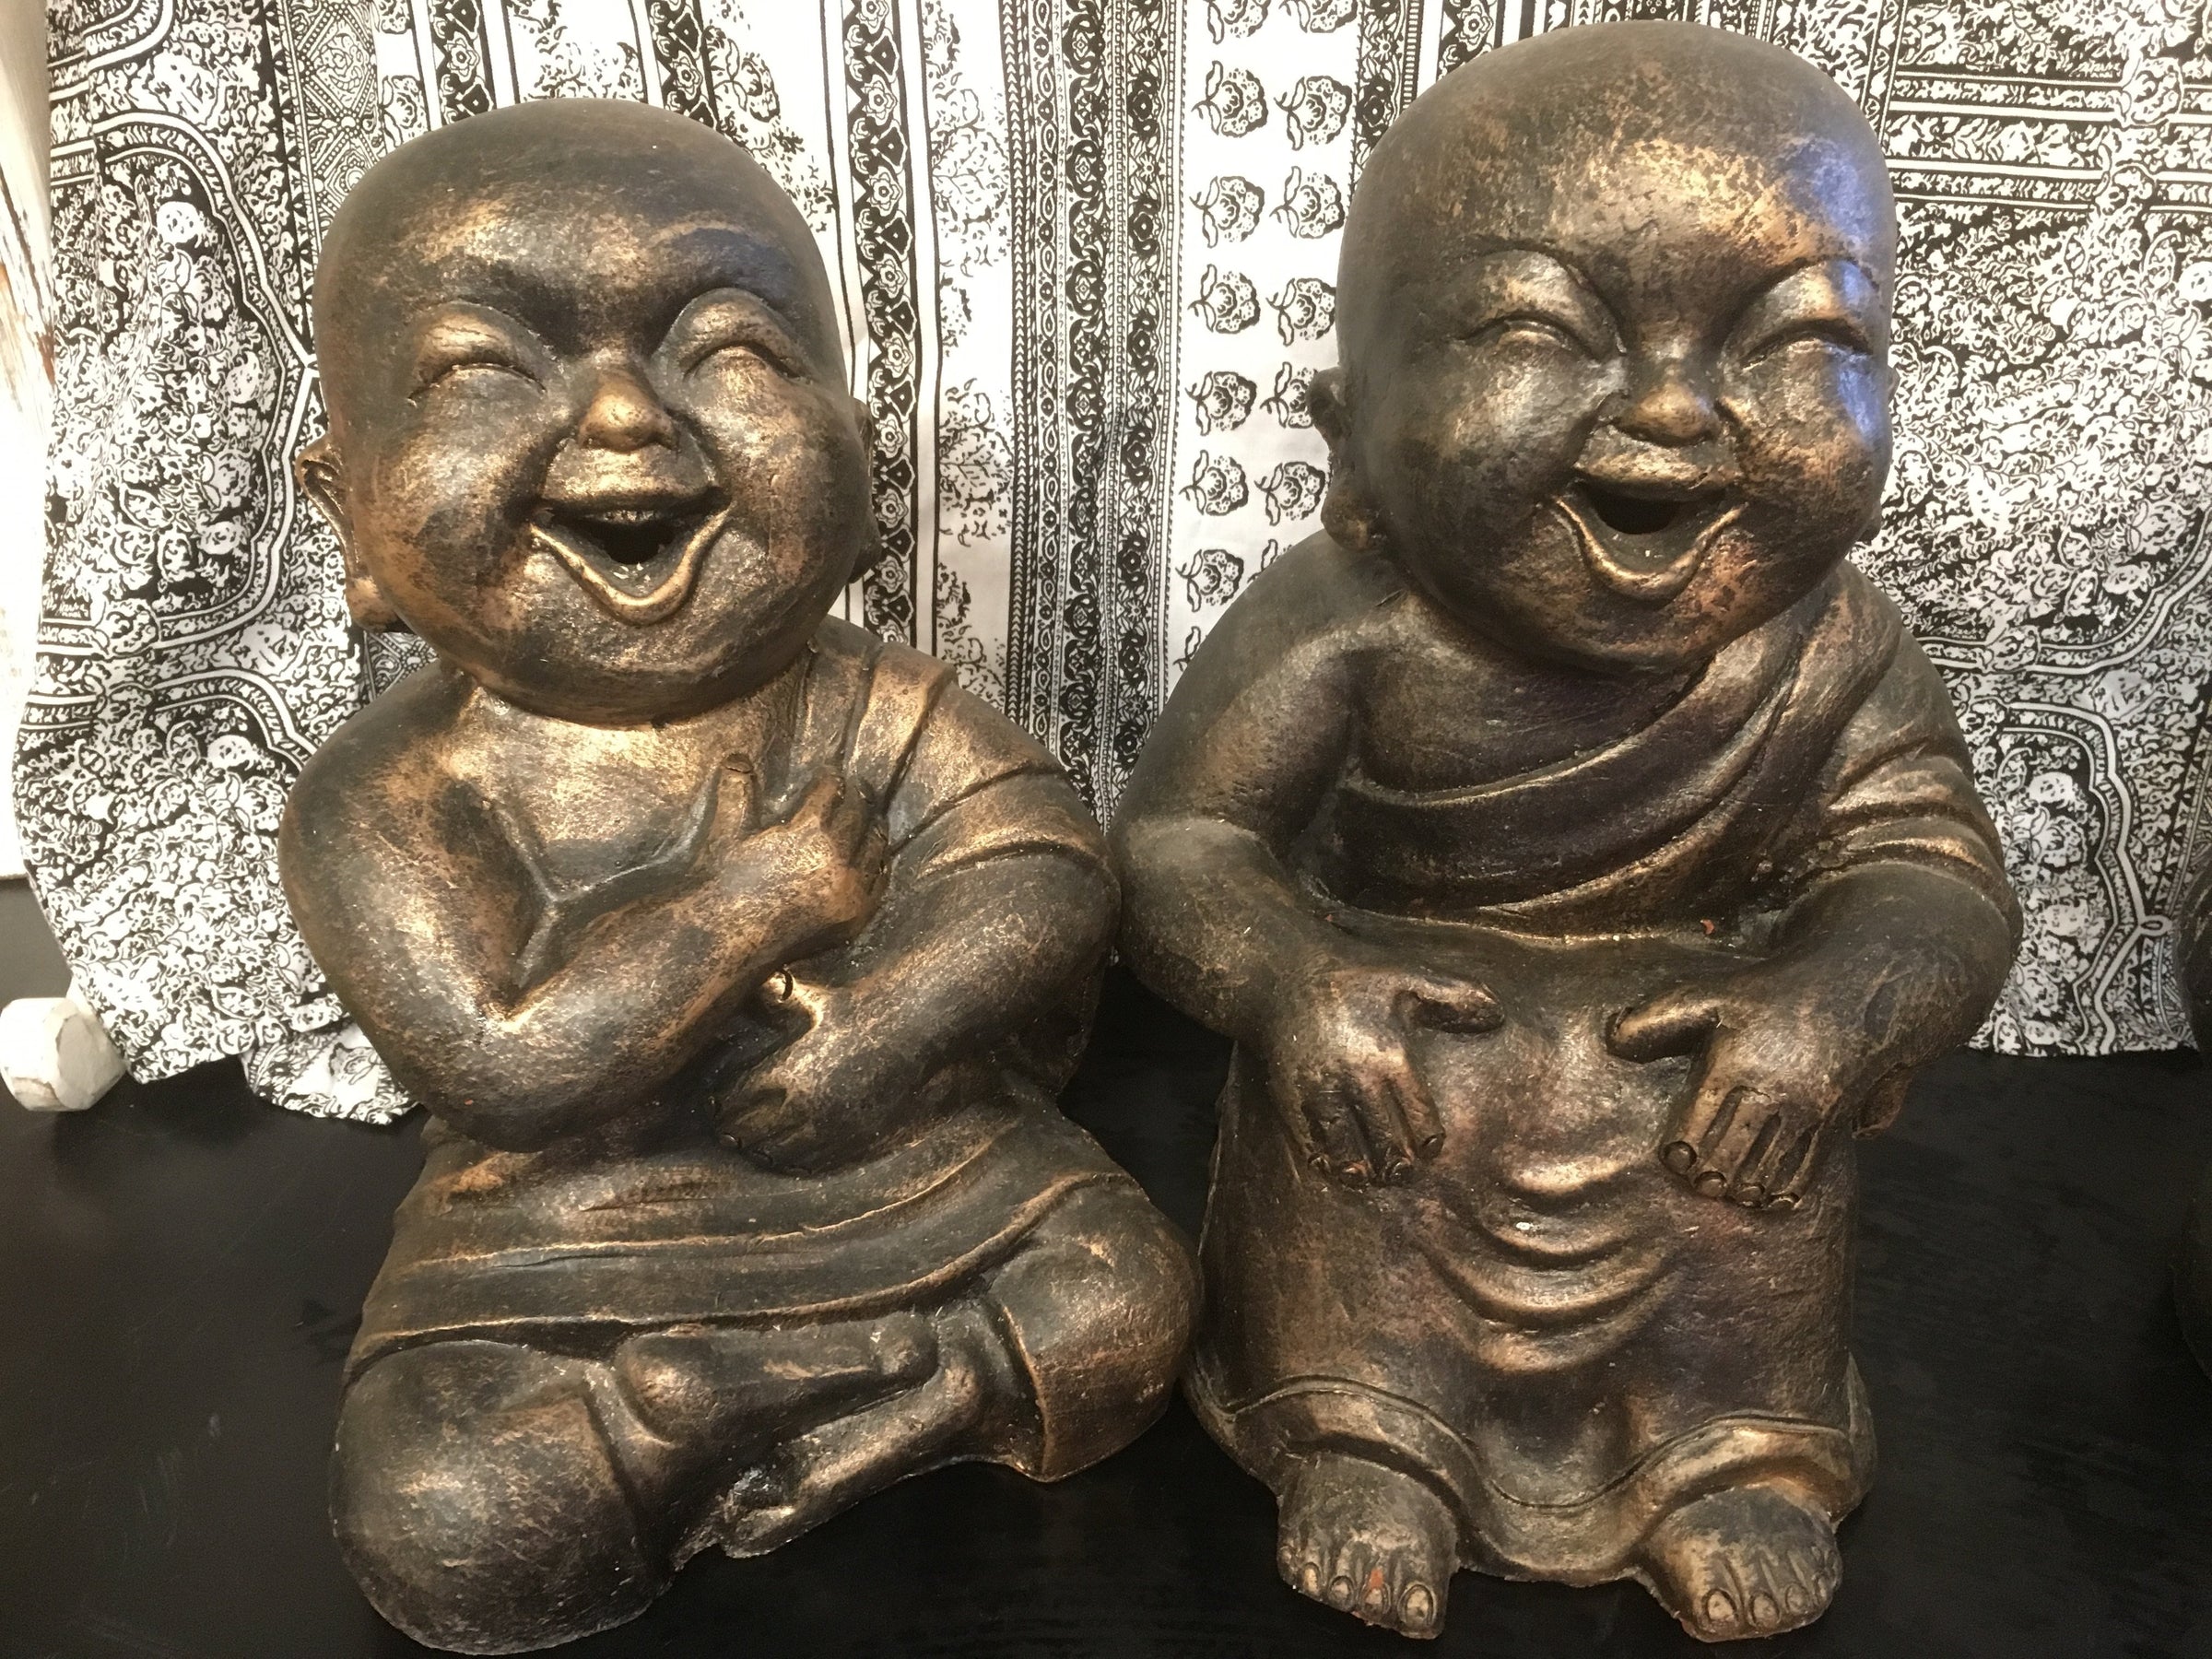 Baby laughing Monks